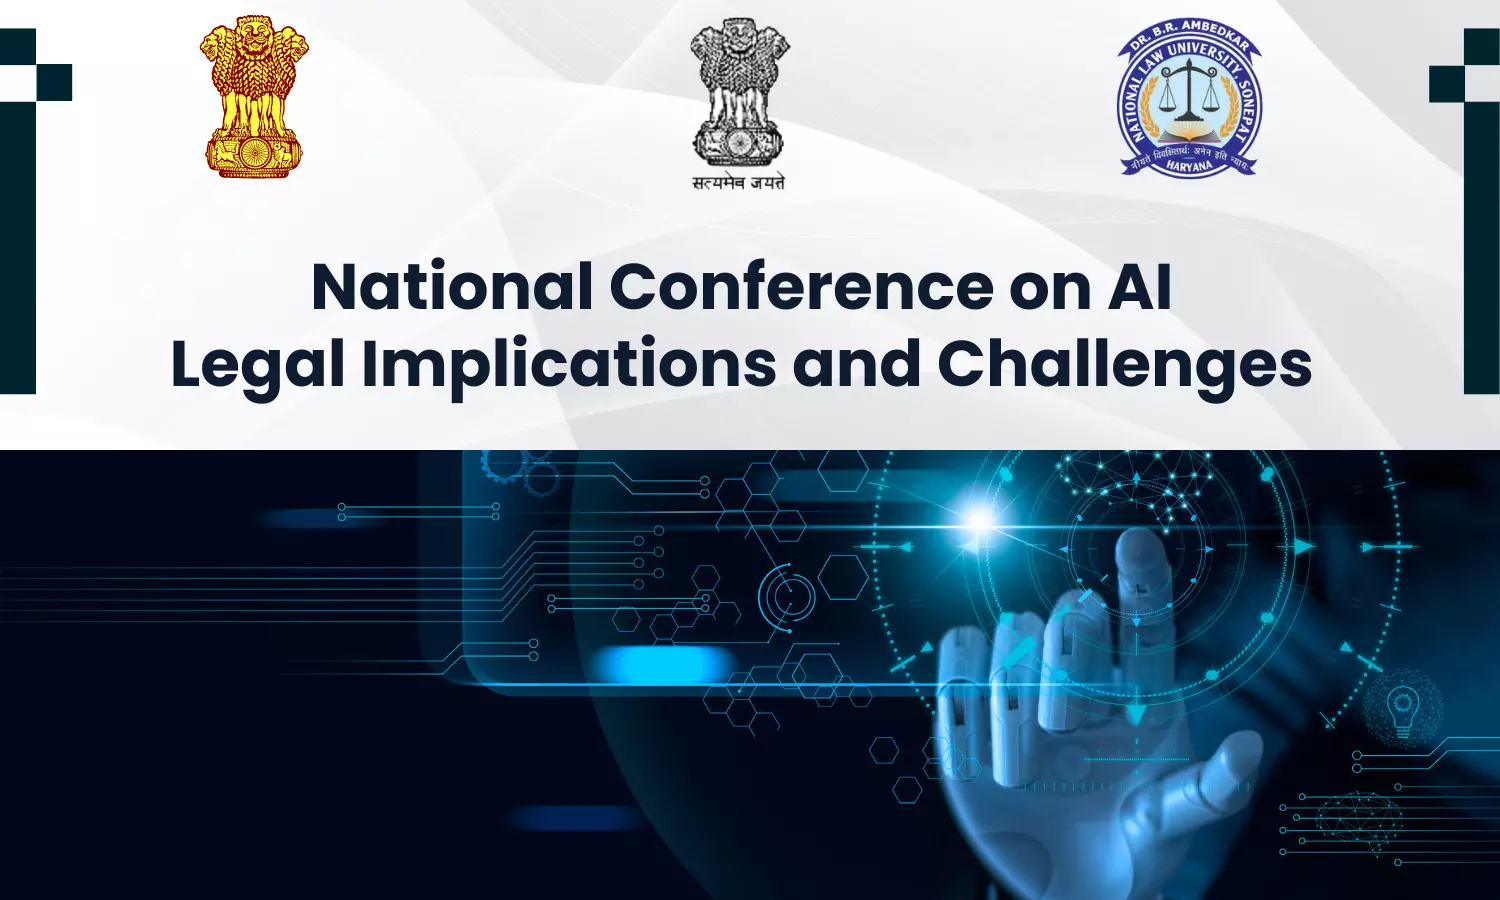 National Conference on Artificial Intelligence: Legal Implications and Challenges